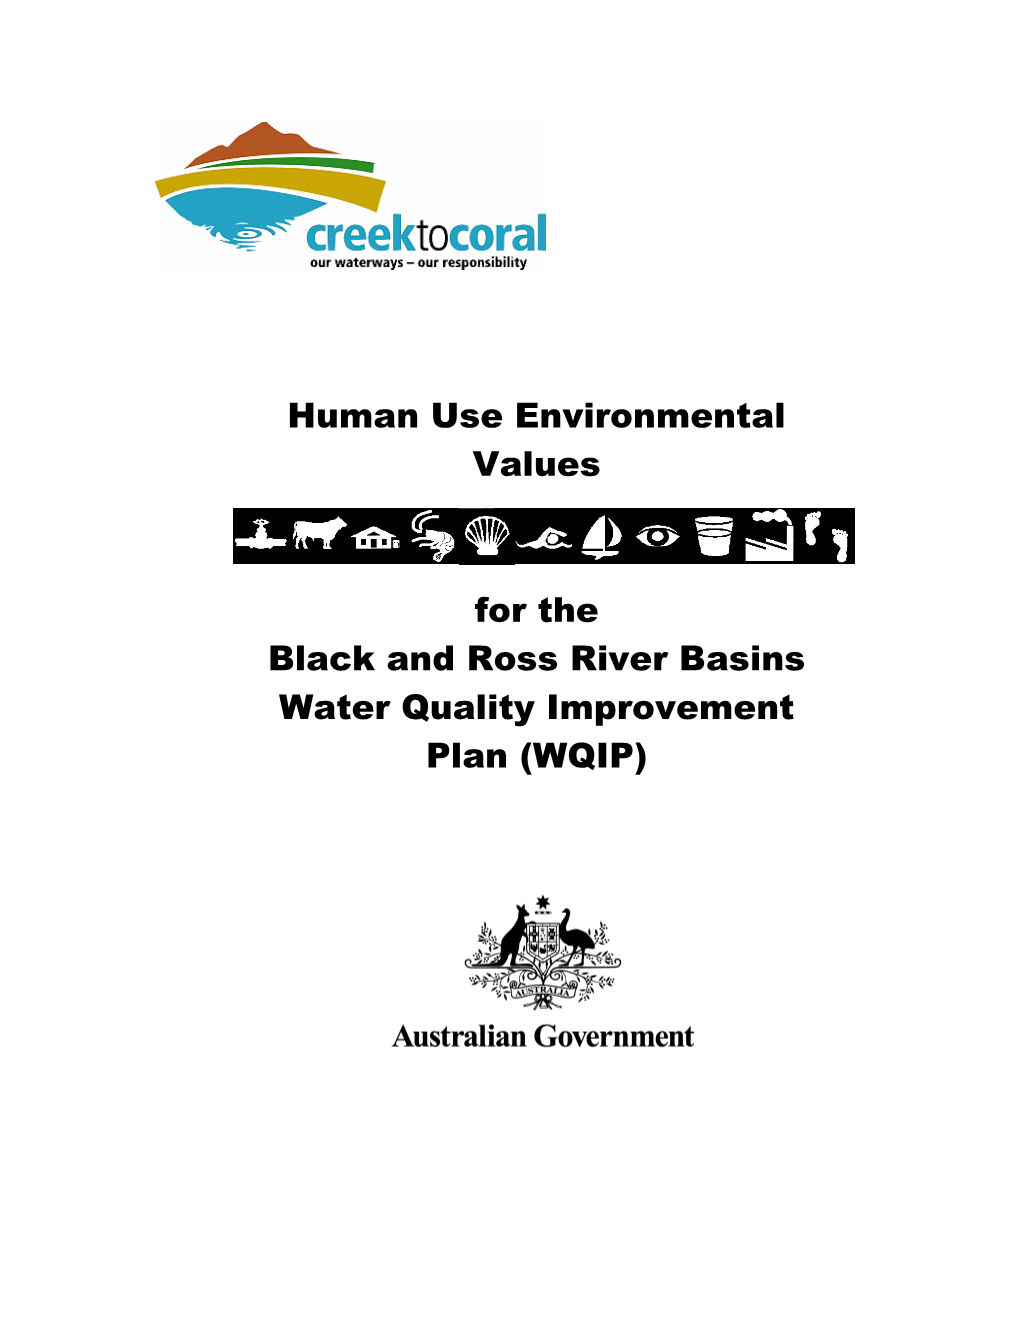 Human Use Environmental Values for the Black and Ross River Basins